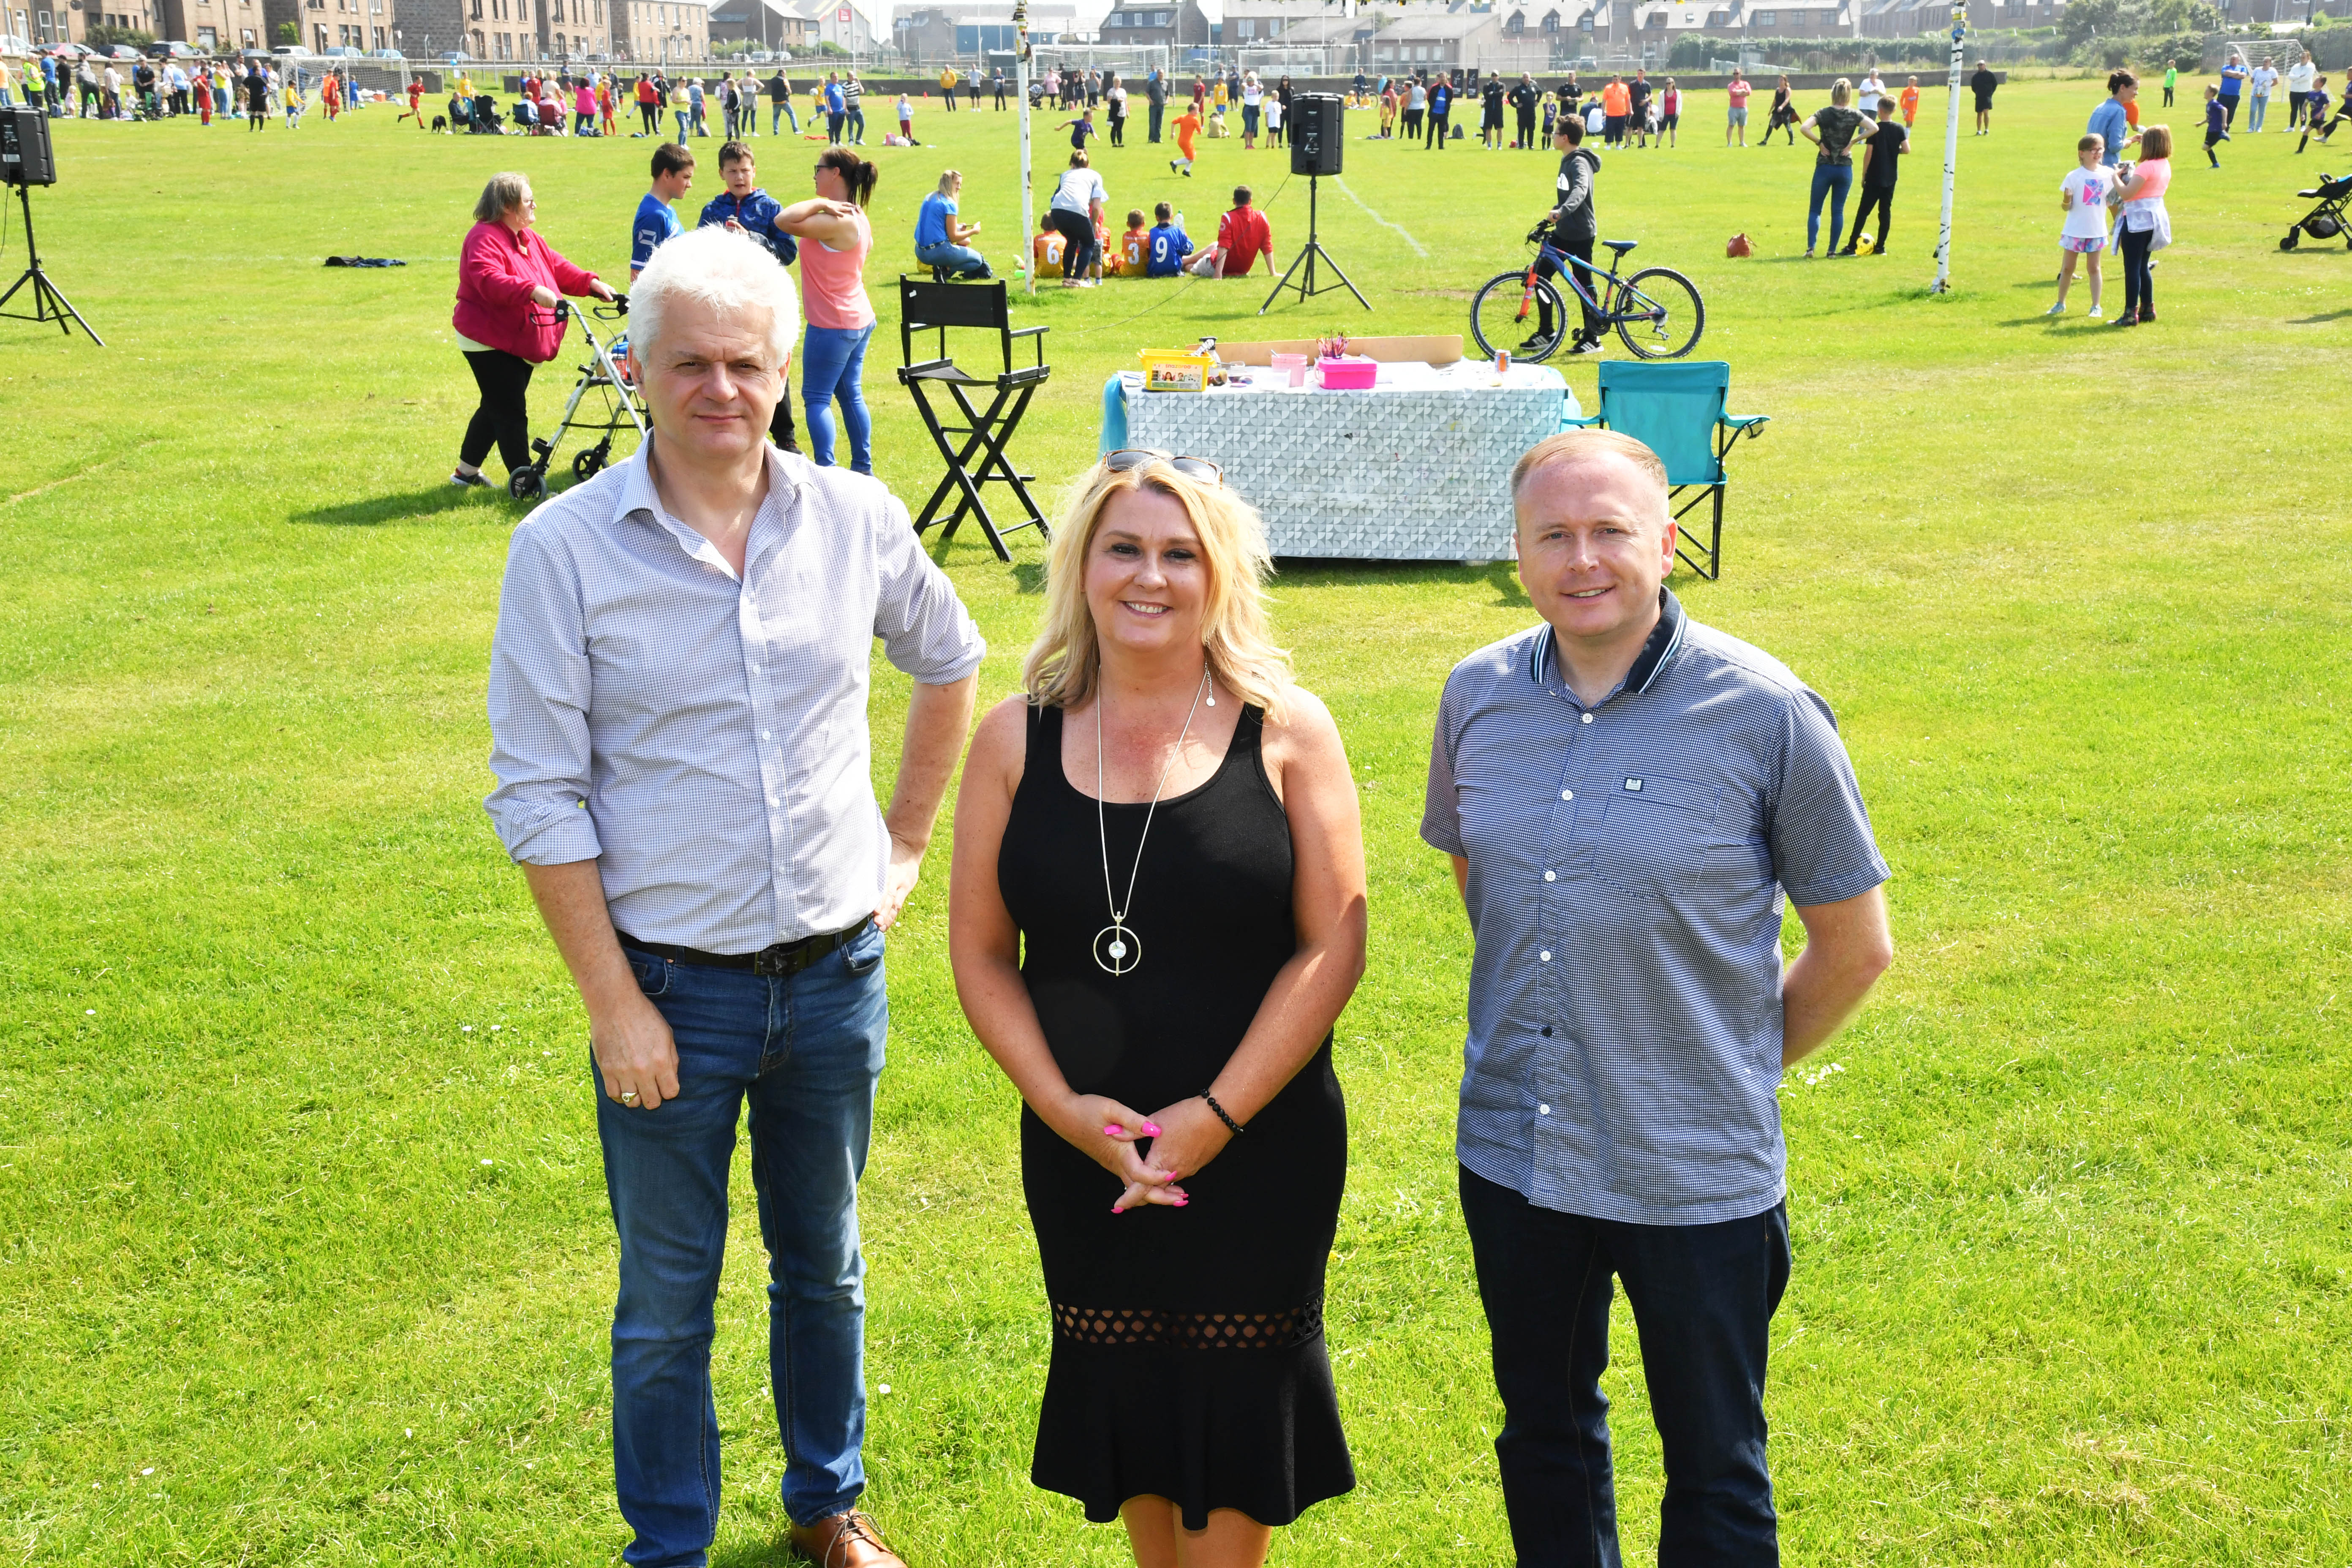 PACT COMMITTEE MEMBERS (L TO R) ALAN FAKELY,SECY,DIANNE BEAGRIE,CHAIR AND GRAHAM MACKIE,VICE CHAIR AT THE FOOTBALL EVENT.